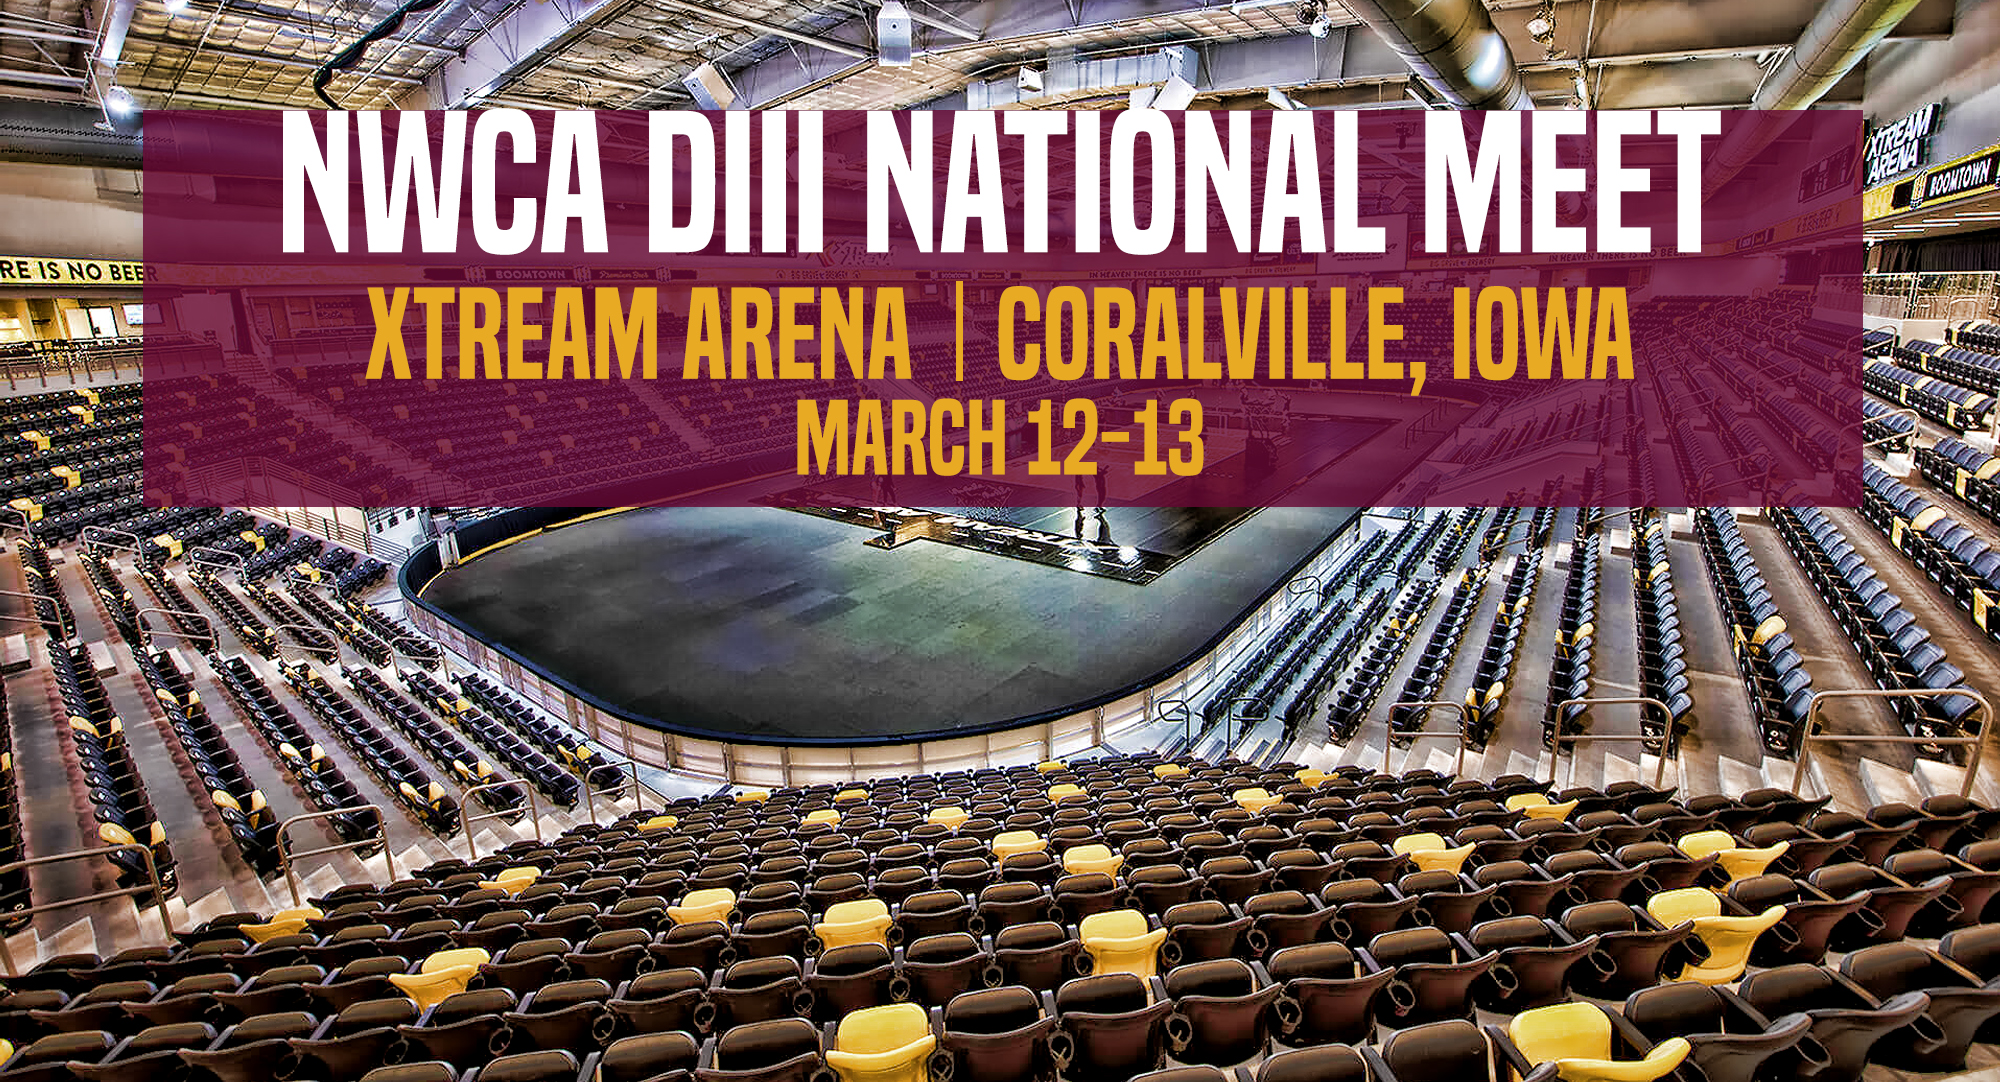 Cole Kubesh and Gabe Zierden highlight a group of 10 Cobbers headed to the NWCA DIII Championship Meet on Mar. 12-13 at the Xtream Arena in Coralville, Iowa.